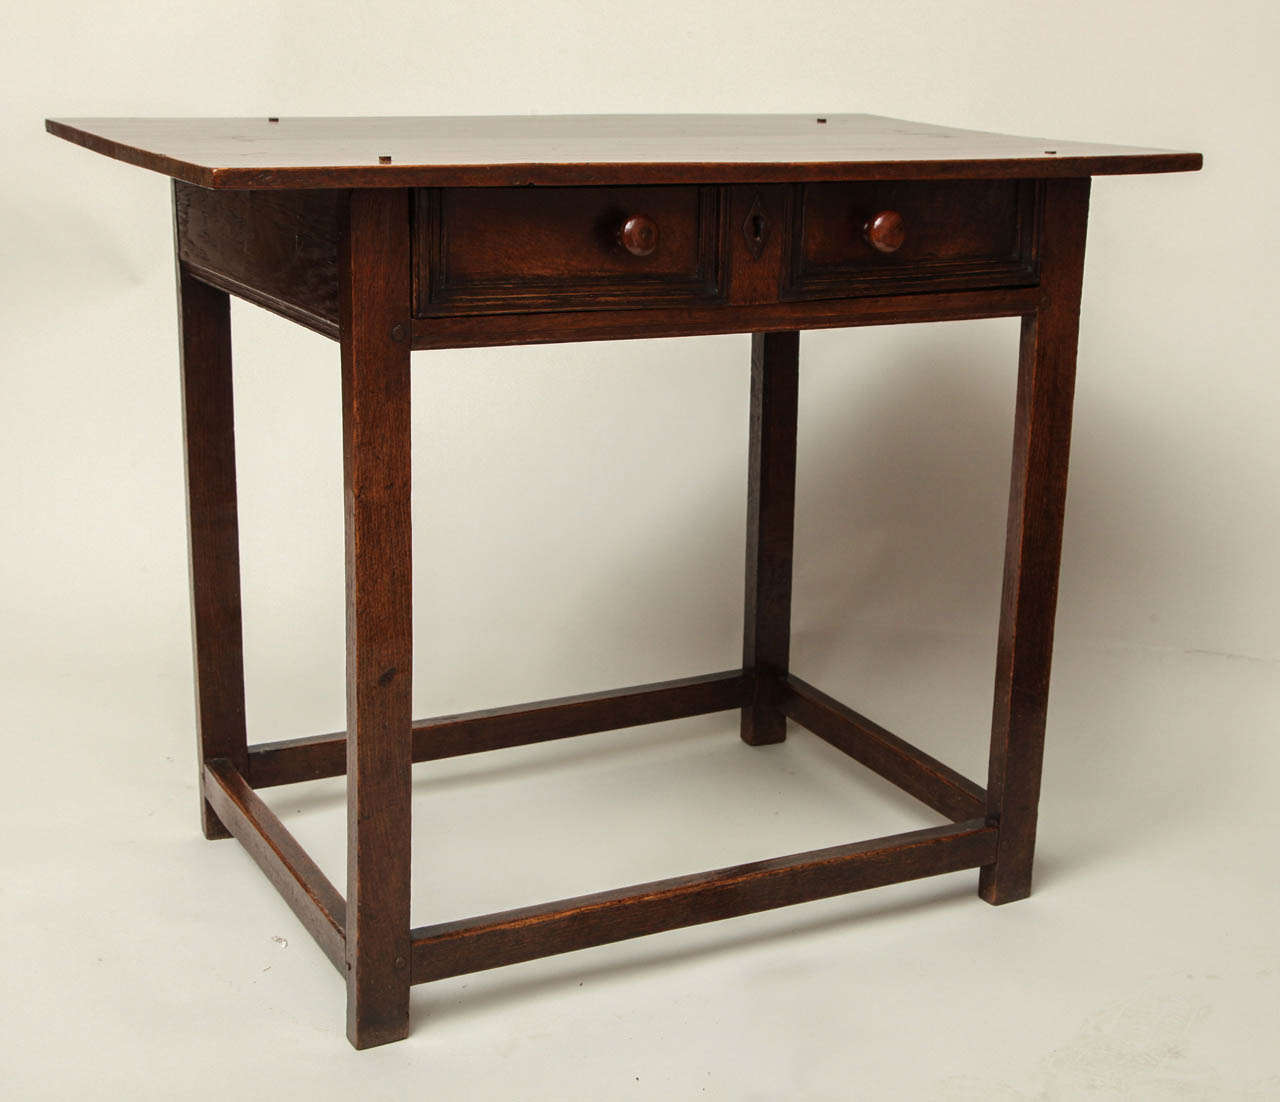 Unusual late 17th Century English oak side table, the two plank top over simple geometric molded drawer having original turned yew wood pulls and iron escutcheon, over rectangular legs joined by box stretcher, the whole with great color and patina